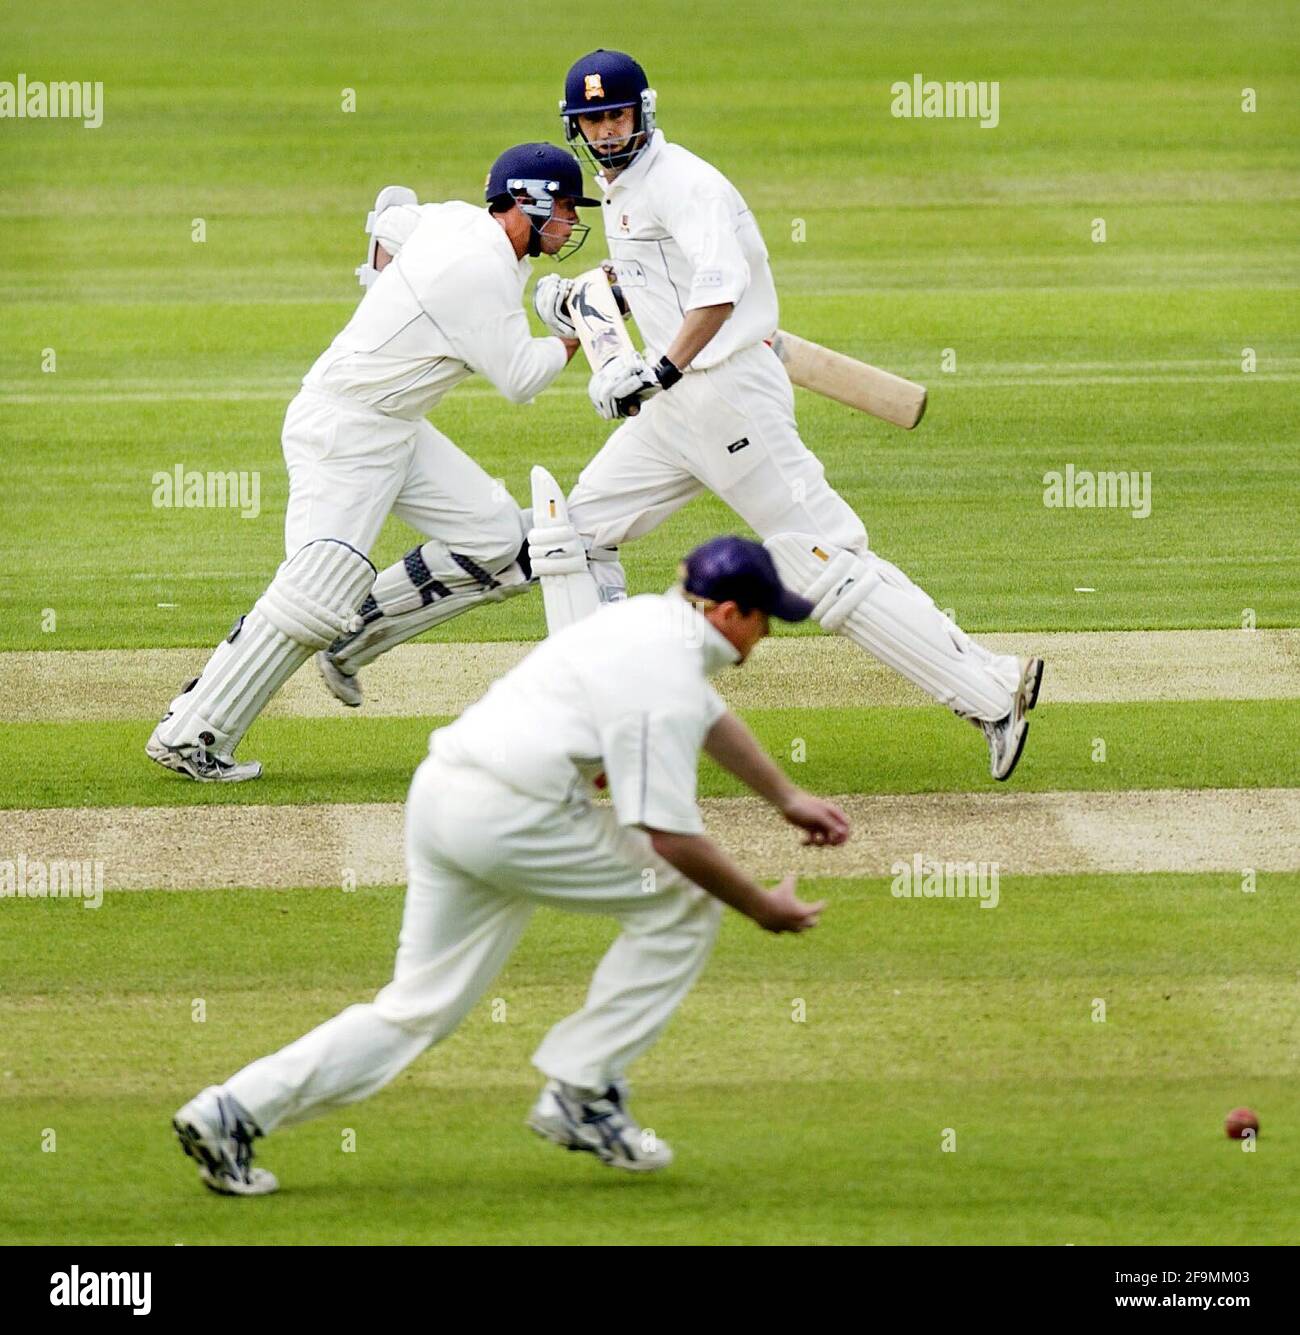 CRICKET C&G TROPHY WARKS V ESSEX AT EDGBASTON L-R M.L.PETTINI AND A.P.GRAYSON RUN AS I.R.BELL IS ABOUT TO PICK UP THE BALL 28/3/2003 PICTURE DAVID ASHDOWNCRICKET Stock Photo